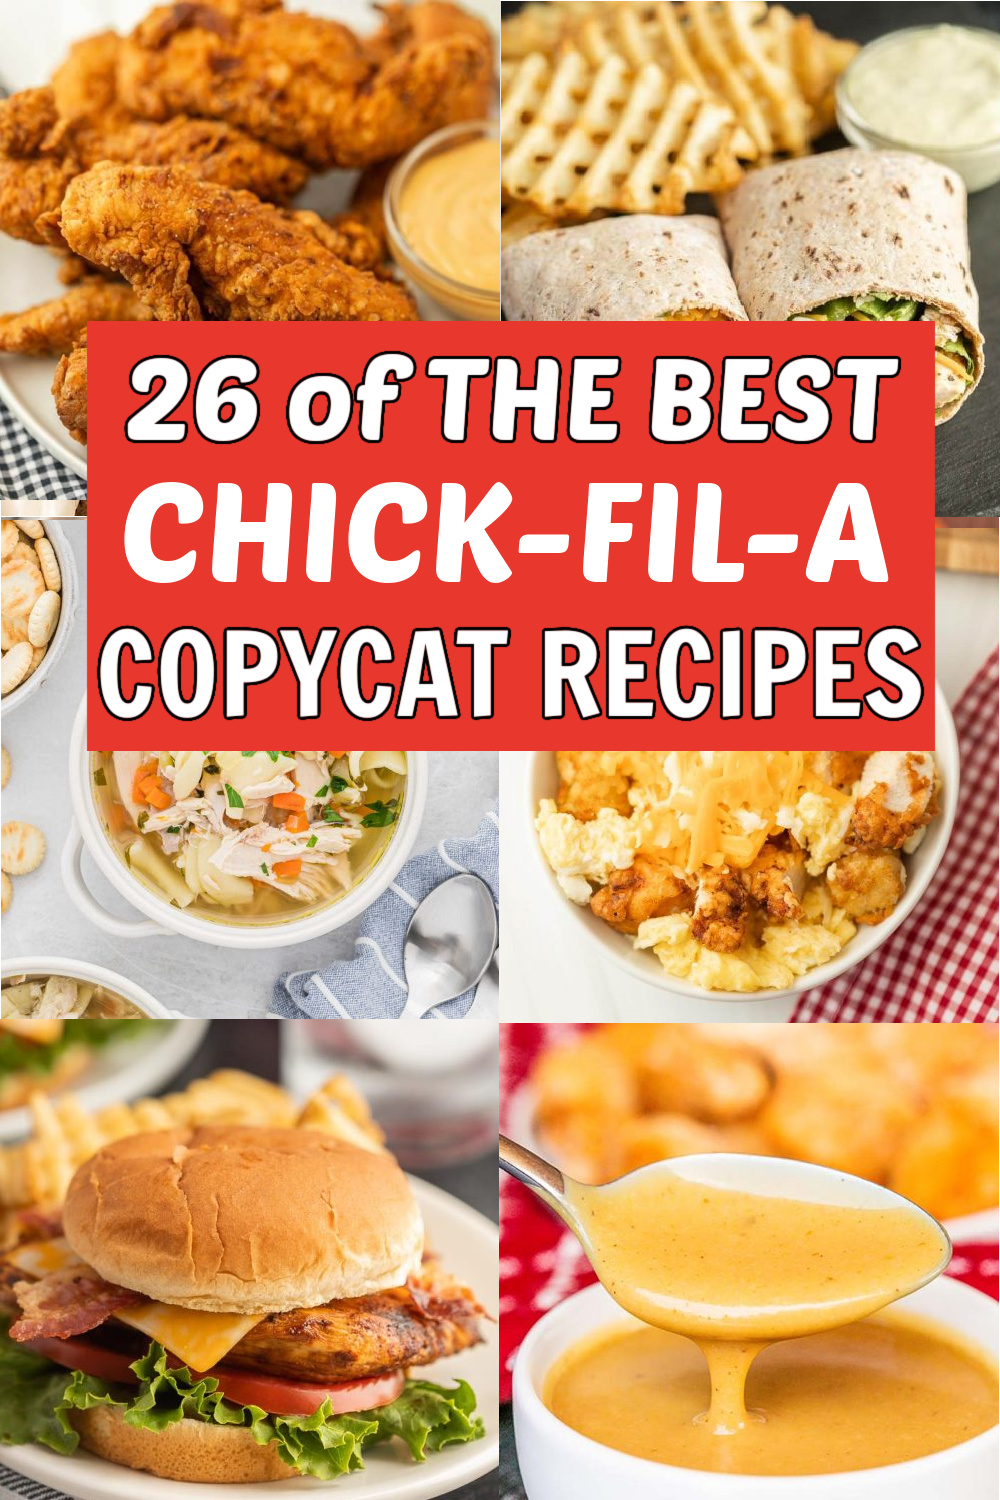 Chick-Fil-A is one of our favorite fast food restaurants. That is why we created Copycat Chick-Fil-A Recipes so we can have it anytime. These easy copycat recipes are delicious! #eatingonadime #chickfila #copycatrecipes